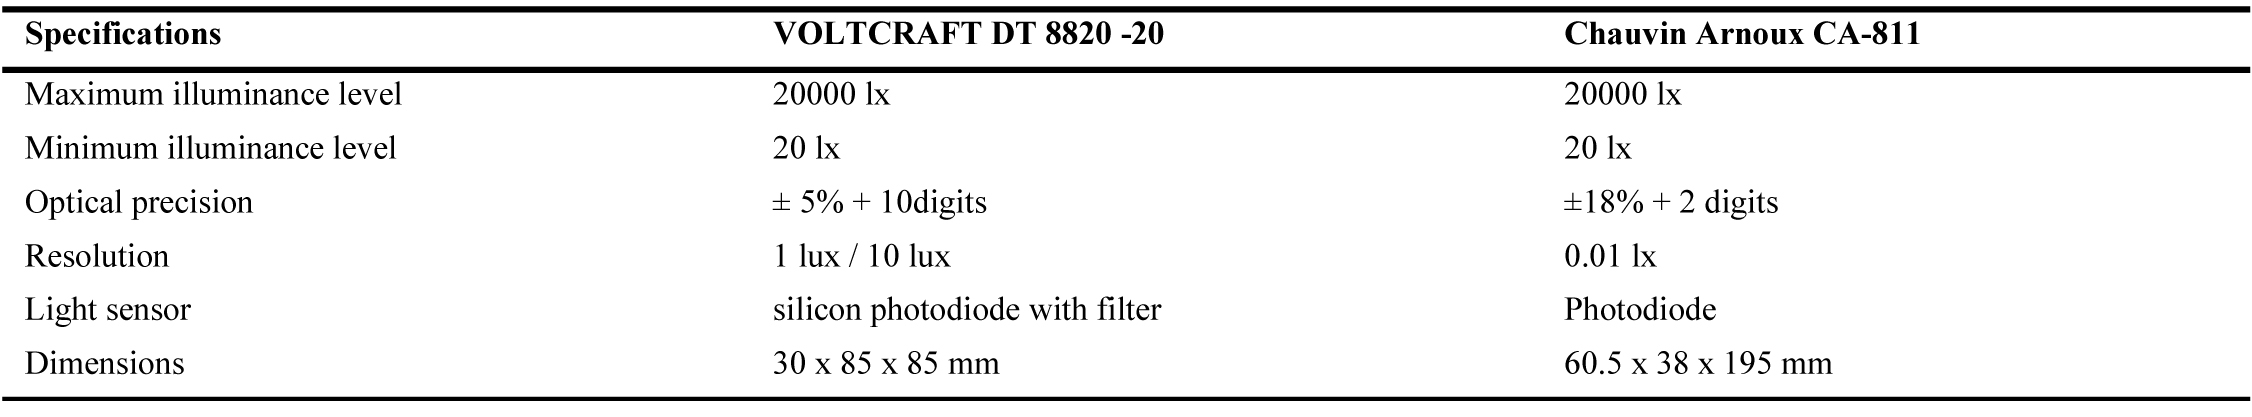 Specifications of Luxmeters used in the measurements.